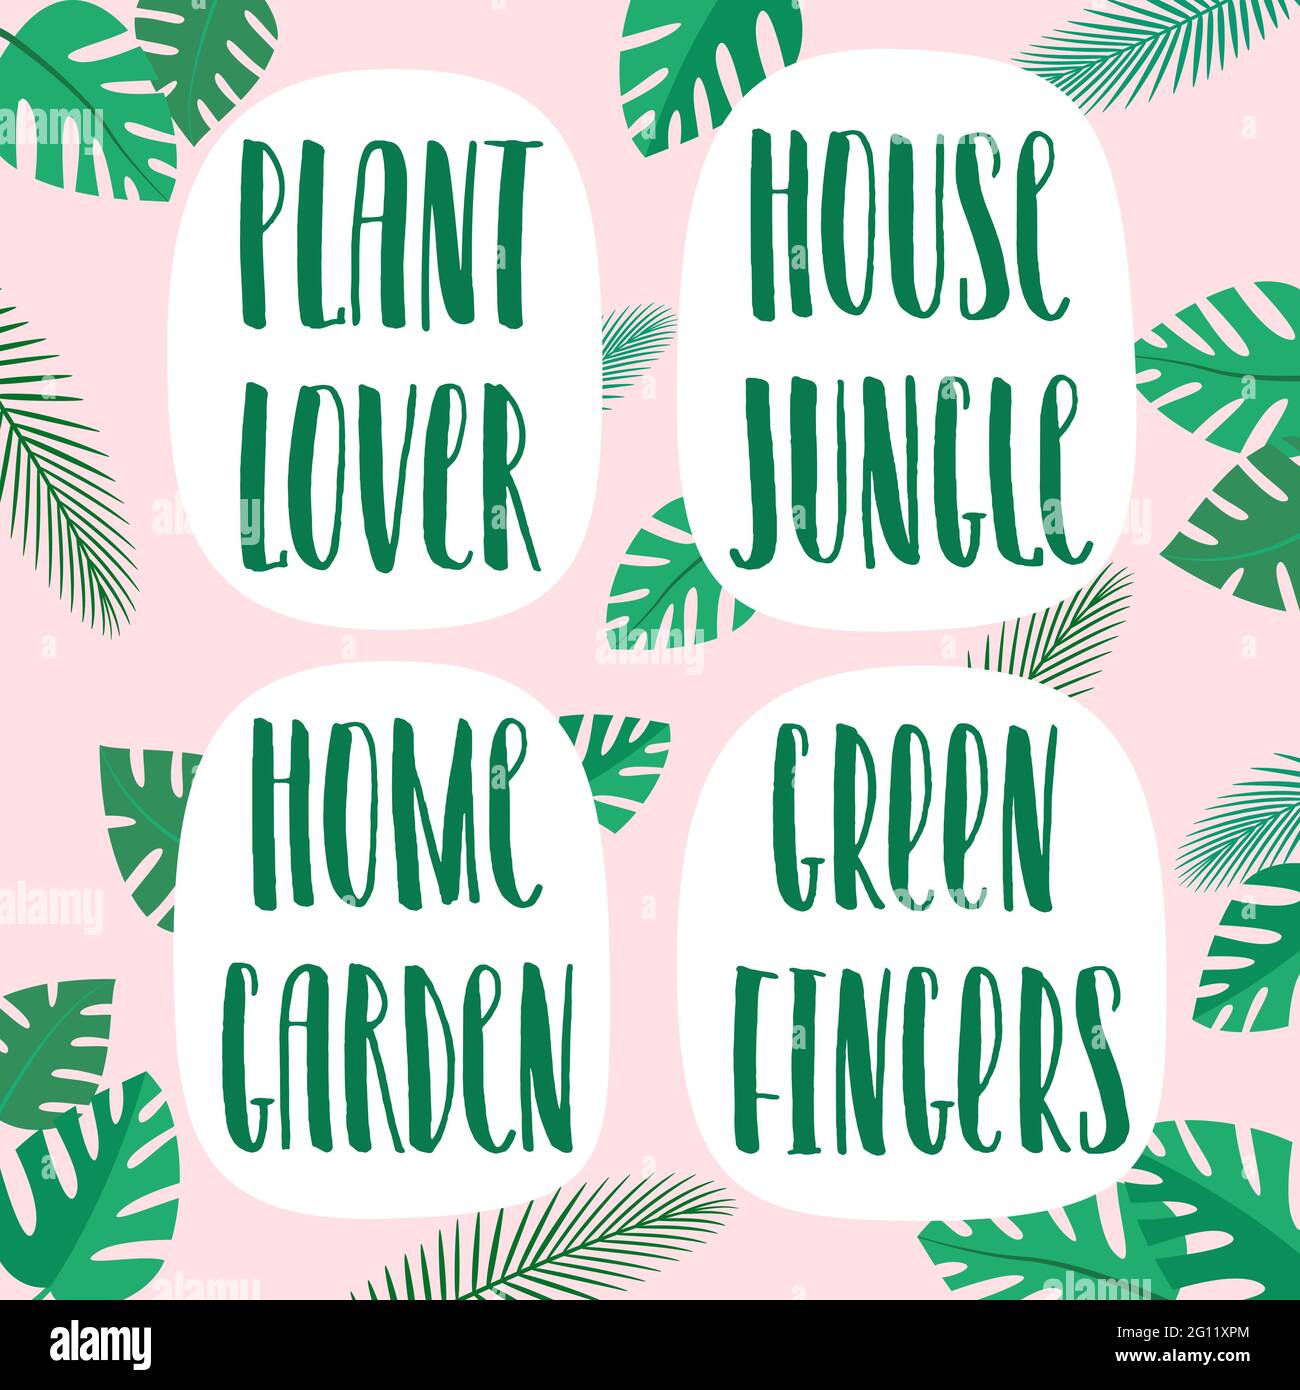 https://c8.alamy.com/comp/2G11XPM/plant-lover-house-jungle-home-garden-green-fingers-hand-drawn-vector-lettering-and-floral-decoration-with-tropical-plants-and-palm-leaves-brush-c-2G11XPM.jpg